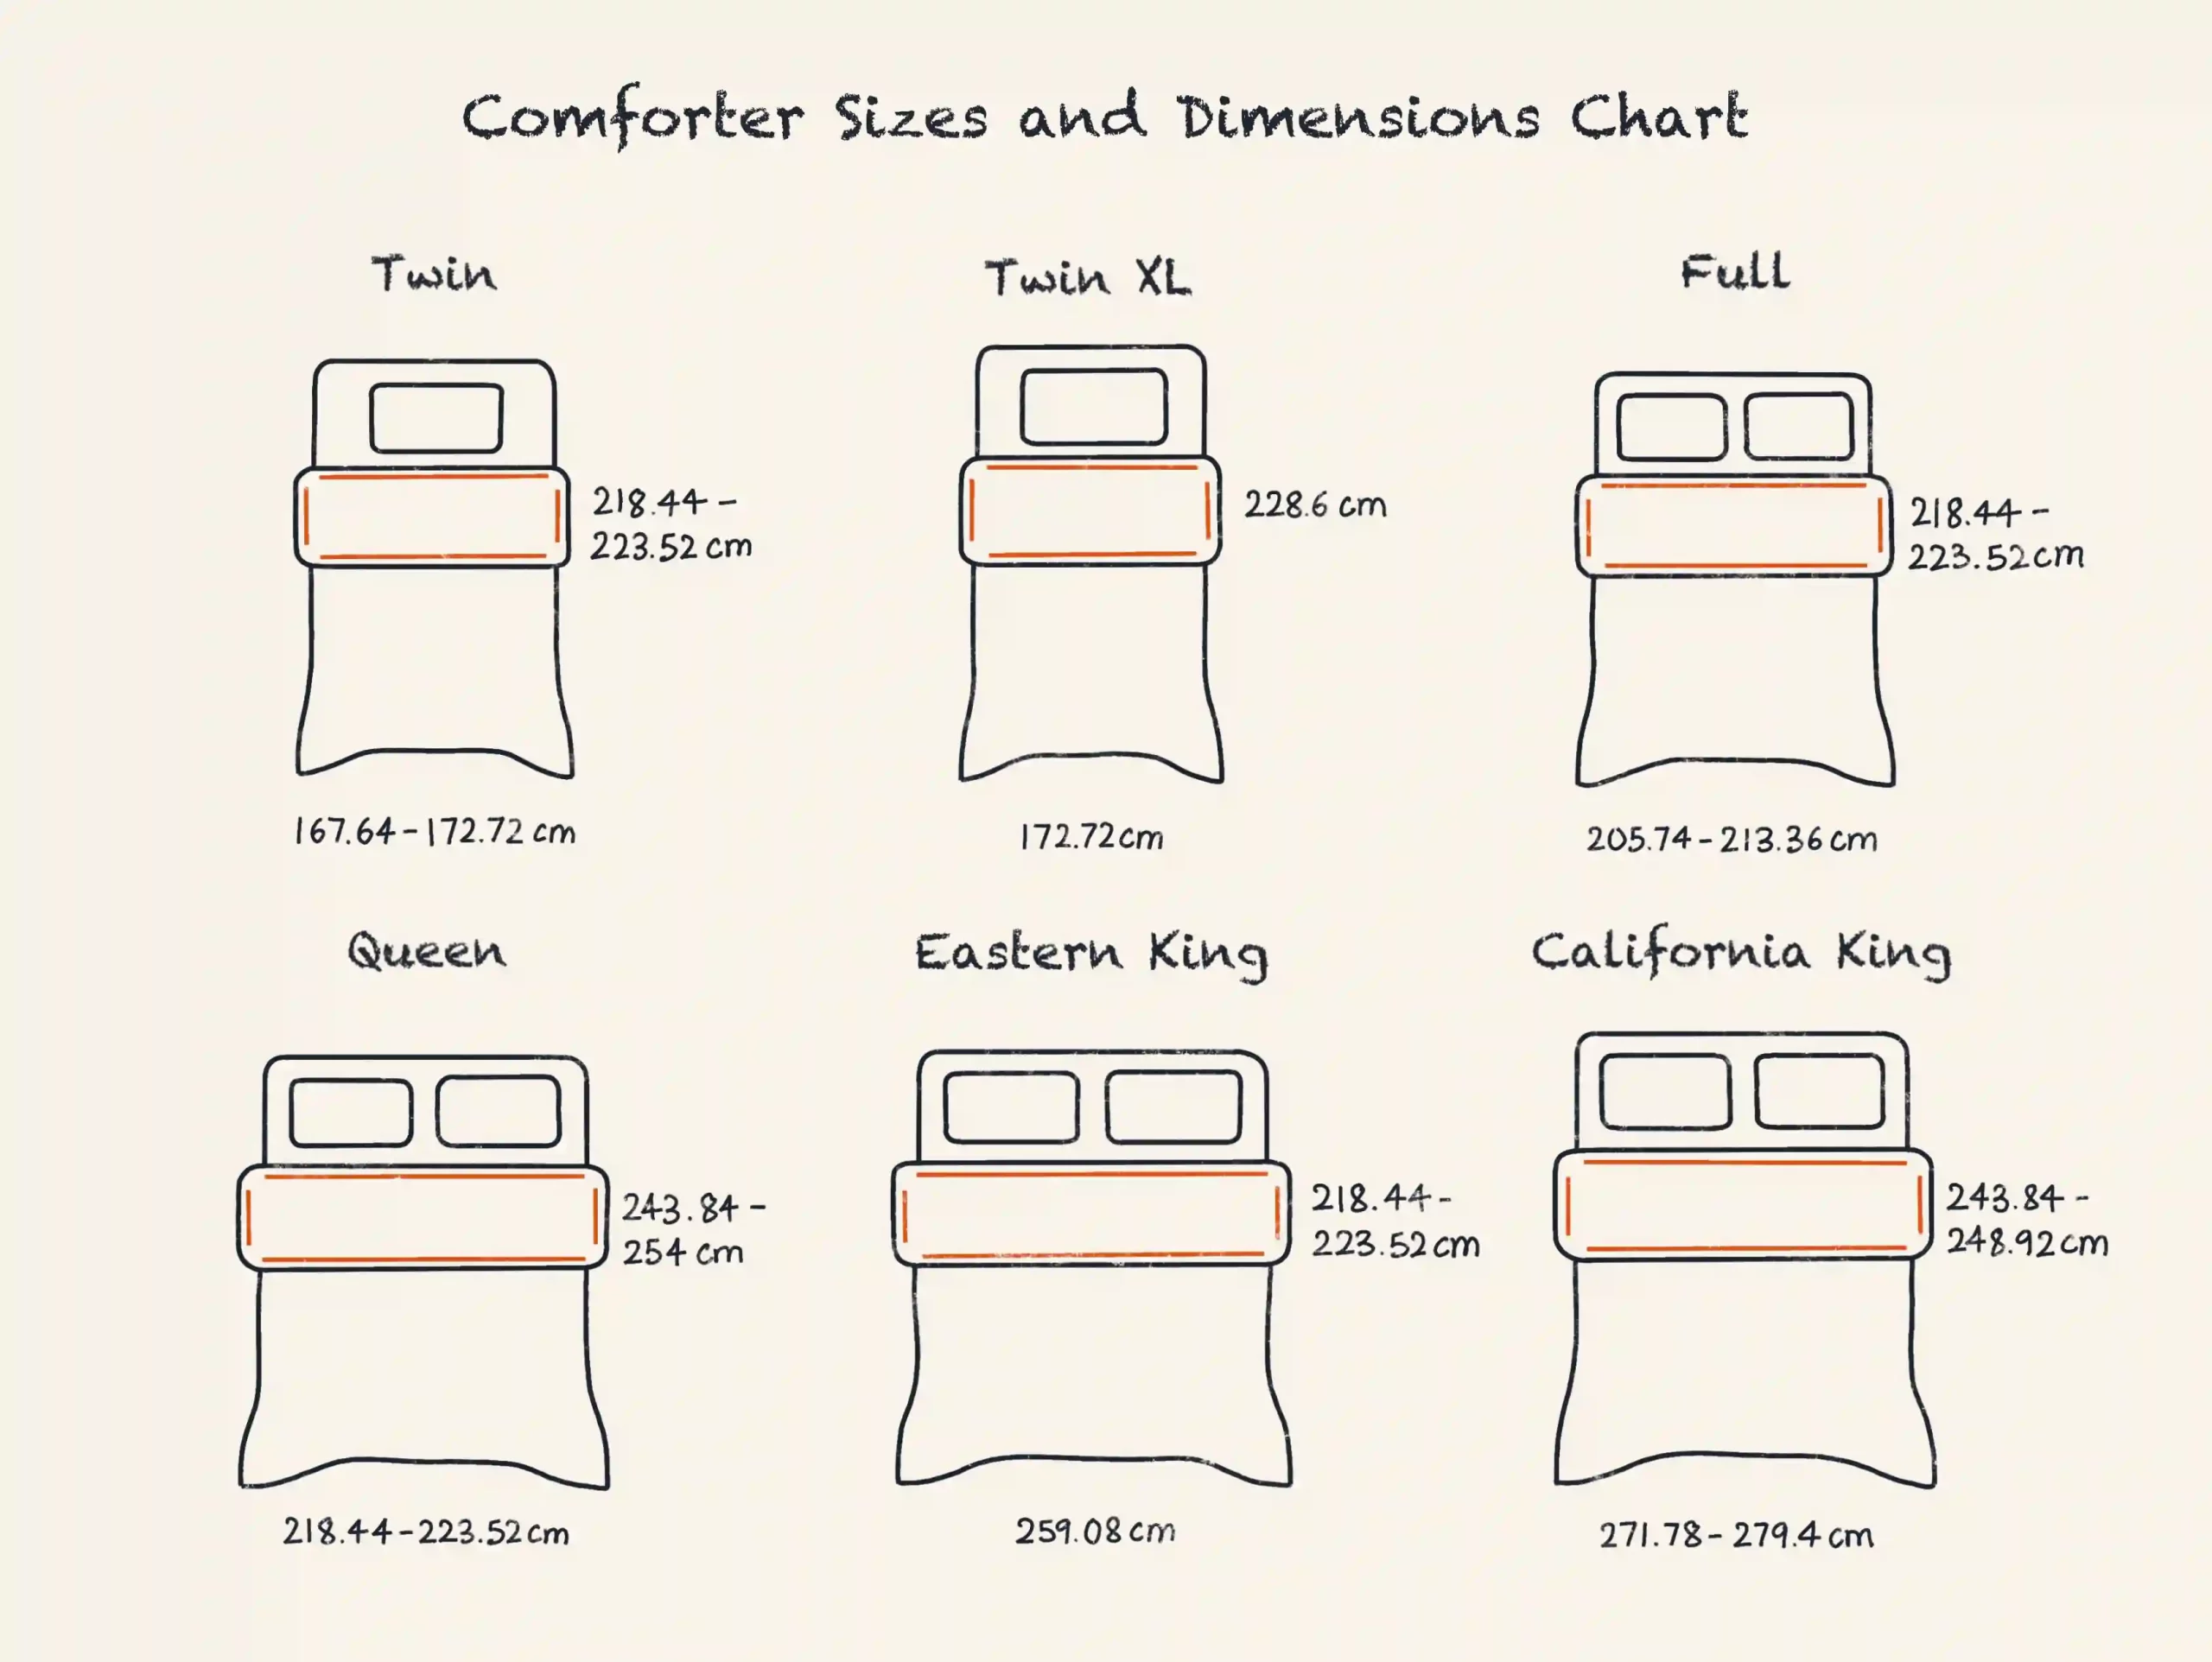 Xxx Comforter Sizes And Dimensions Chart Scaled.webp